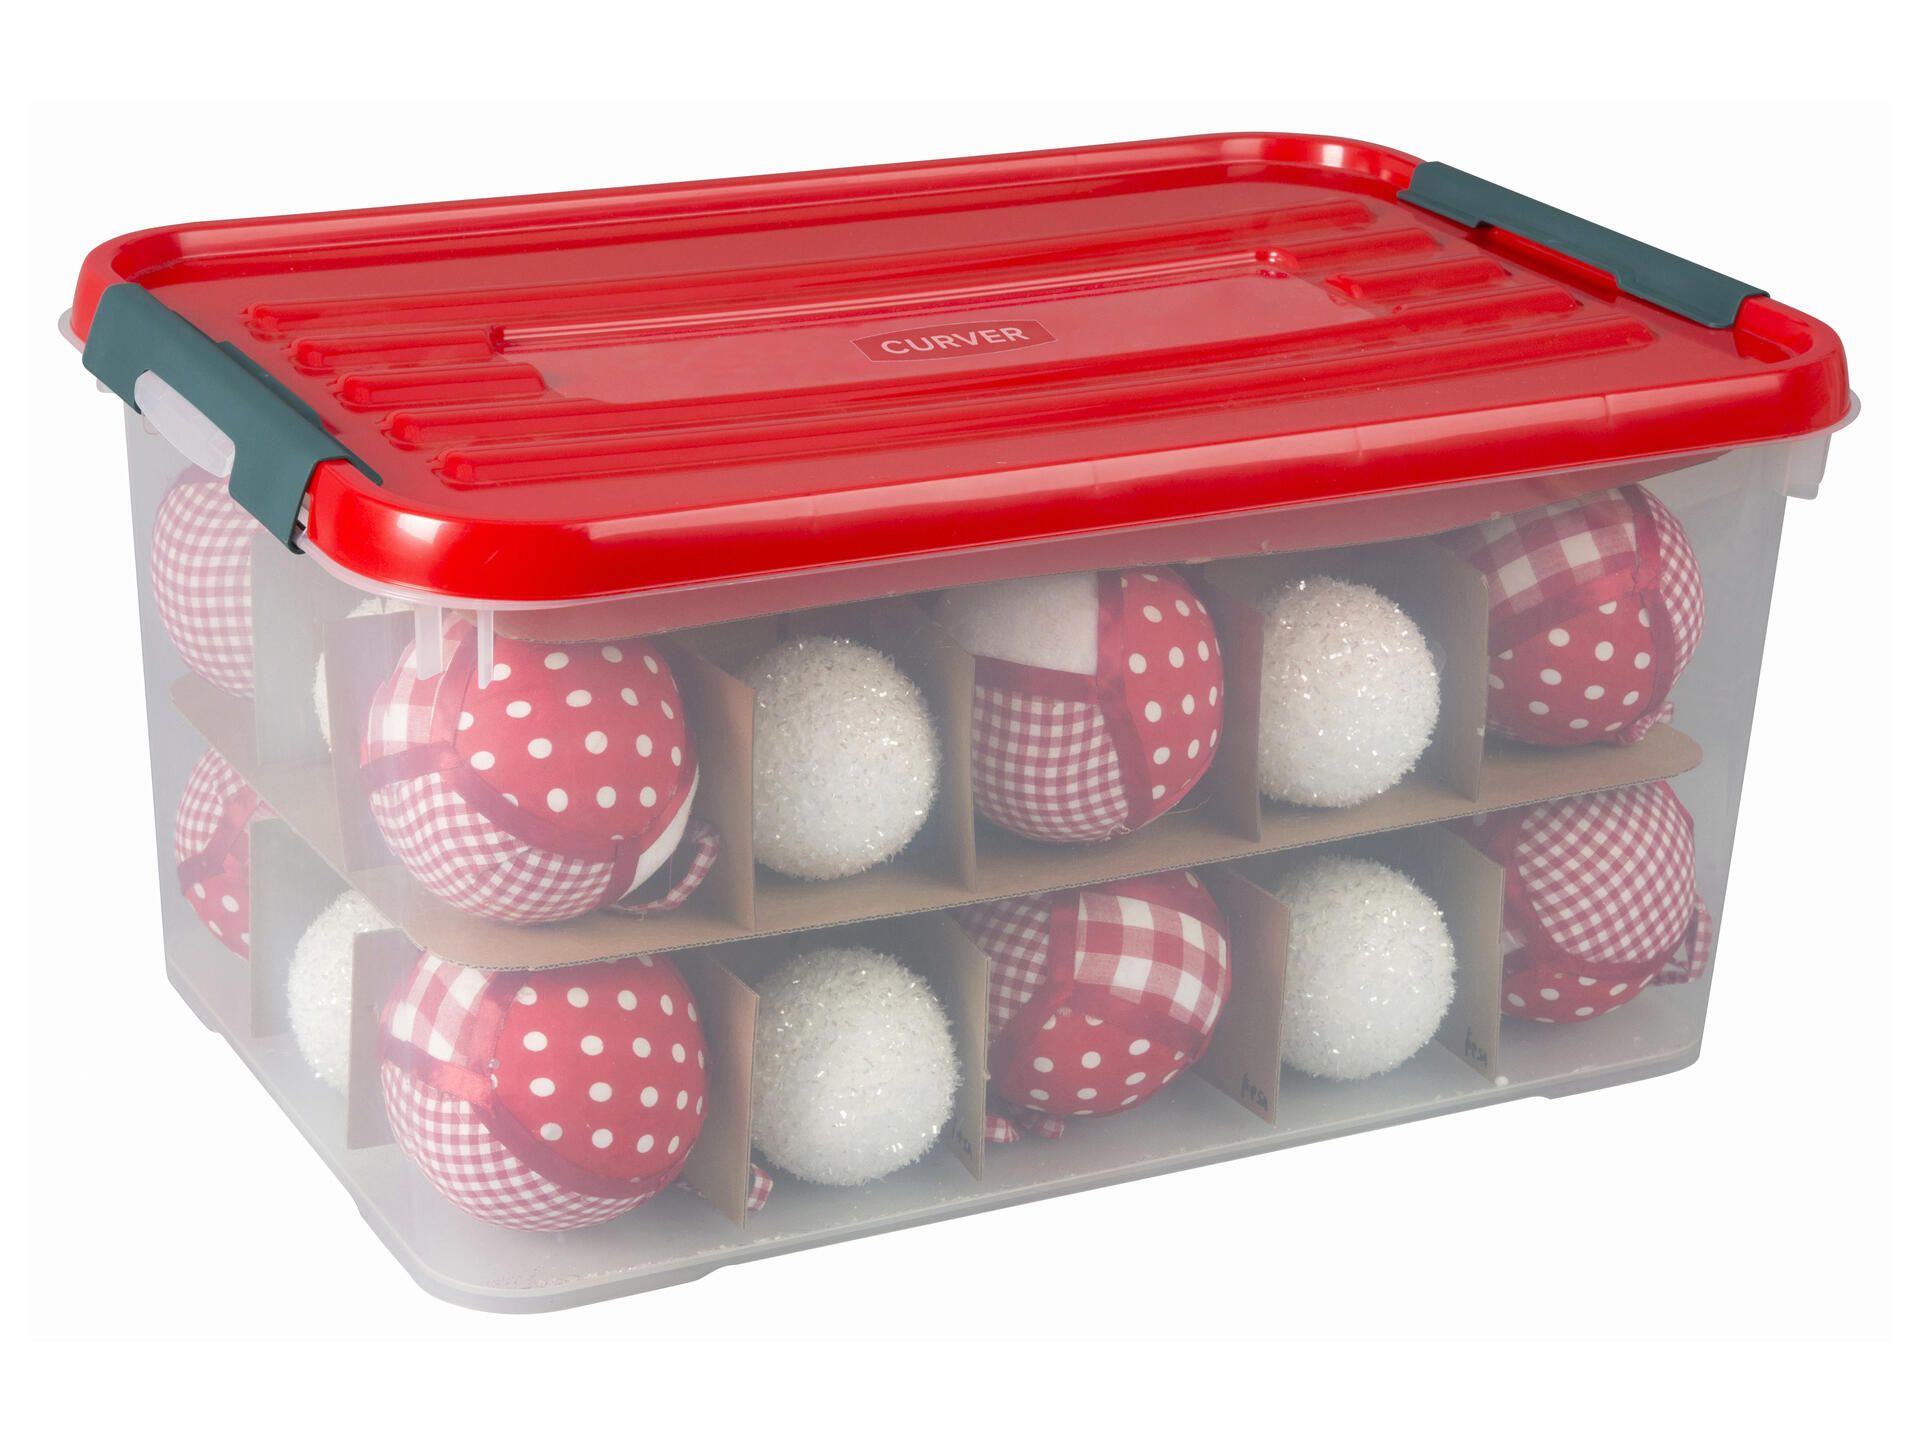 CURVER STORAGE BOX WITH DIVIDERS 50L